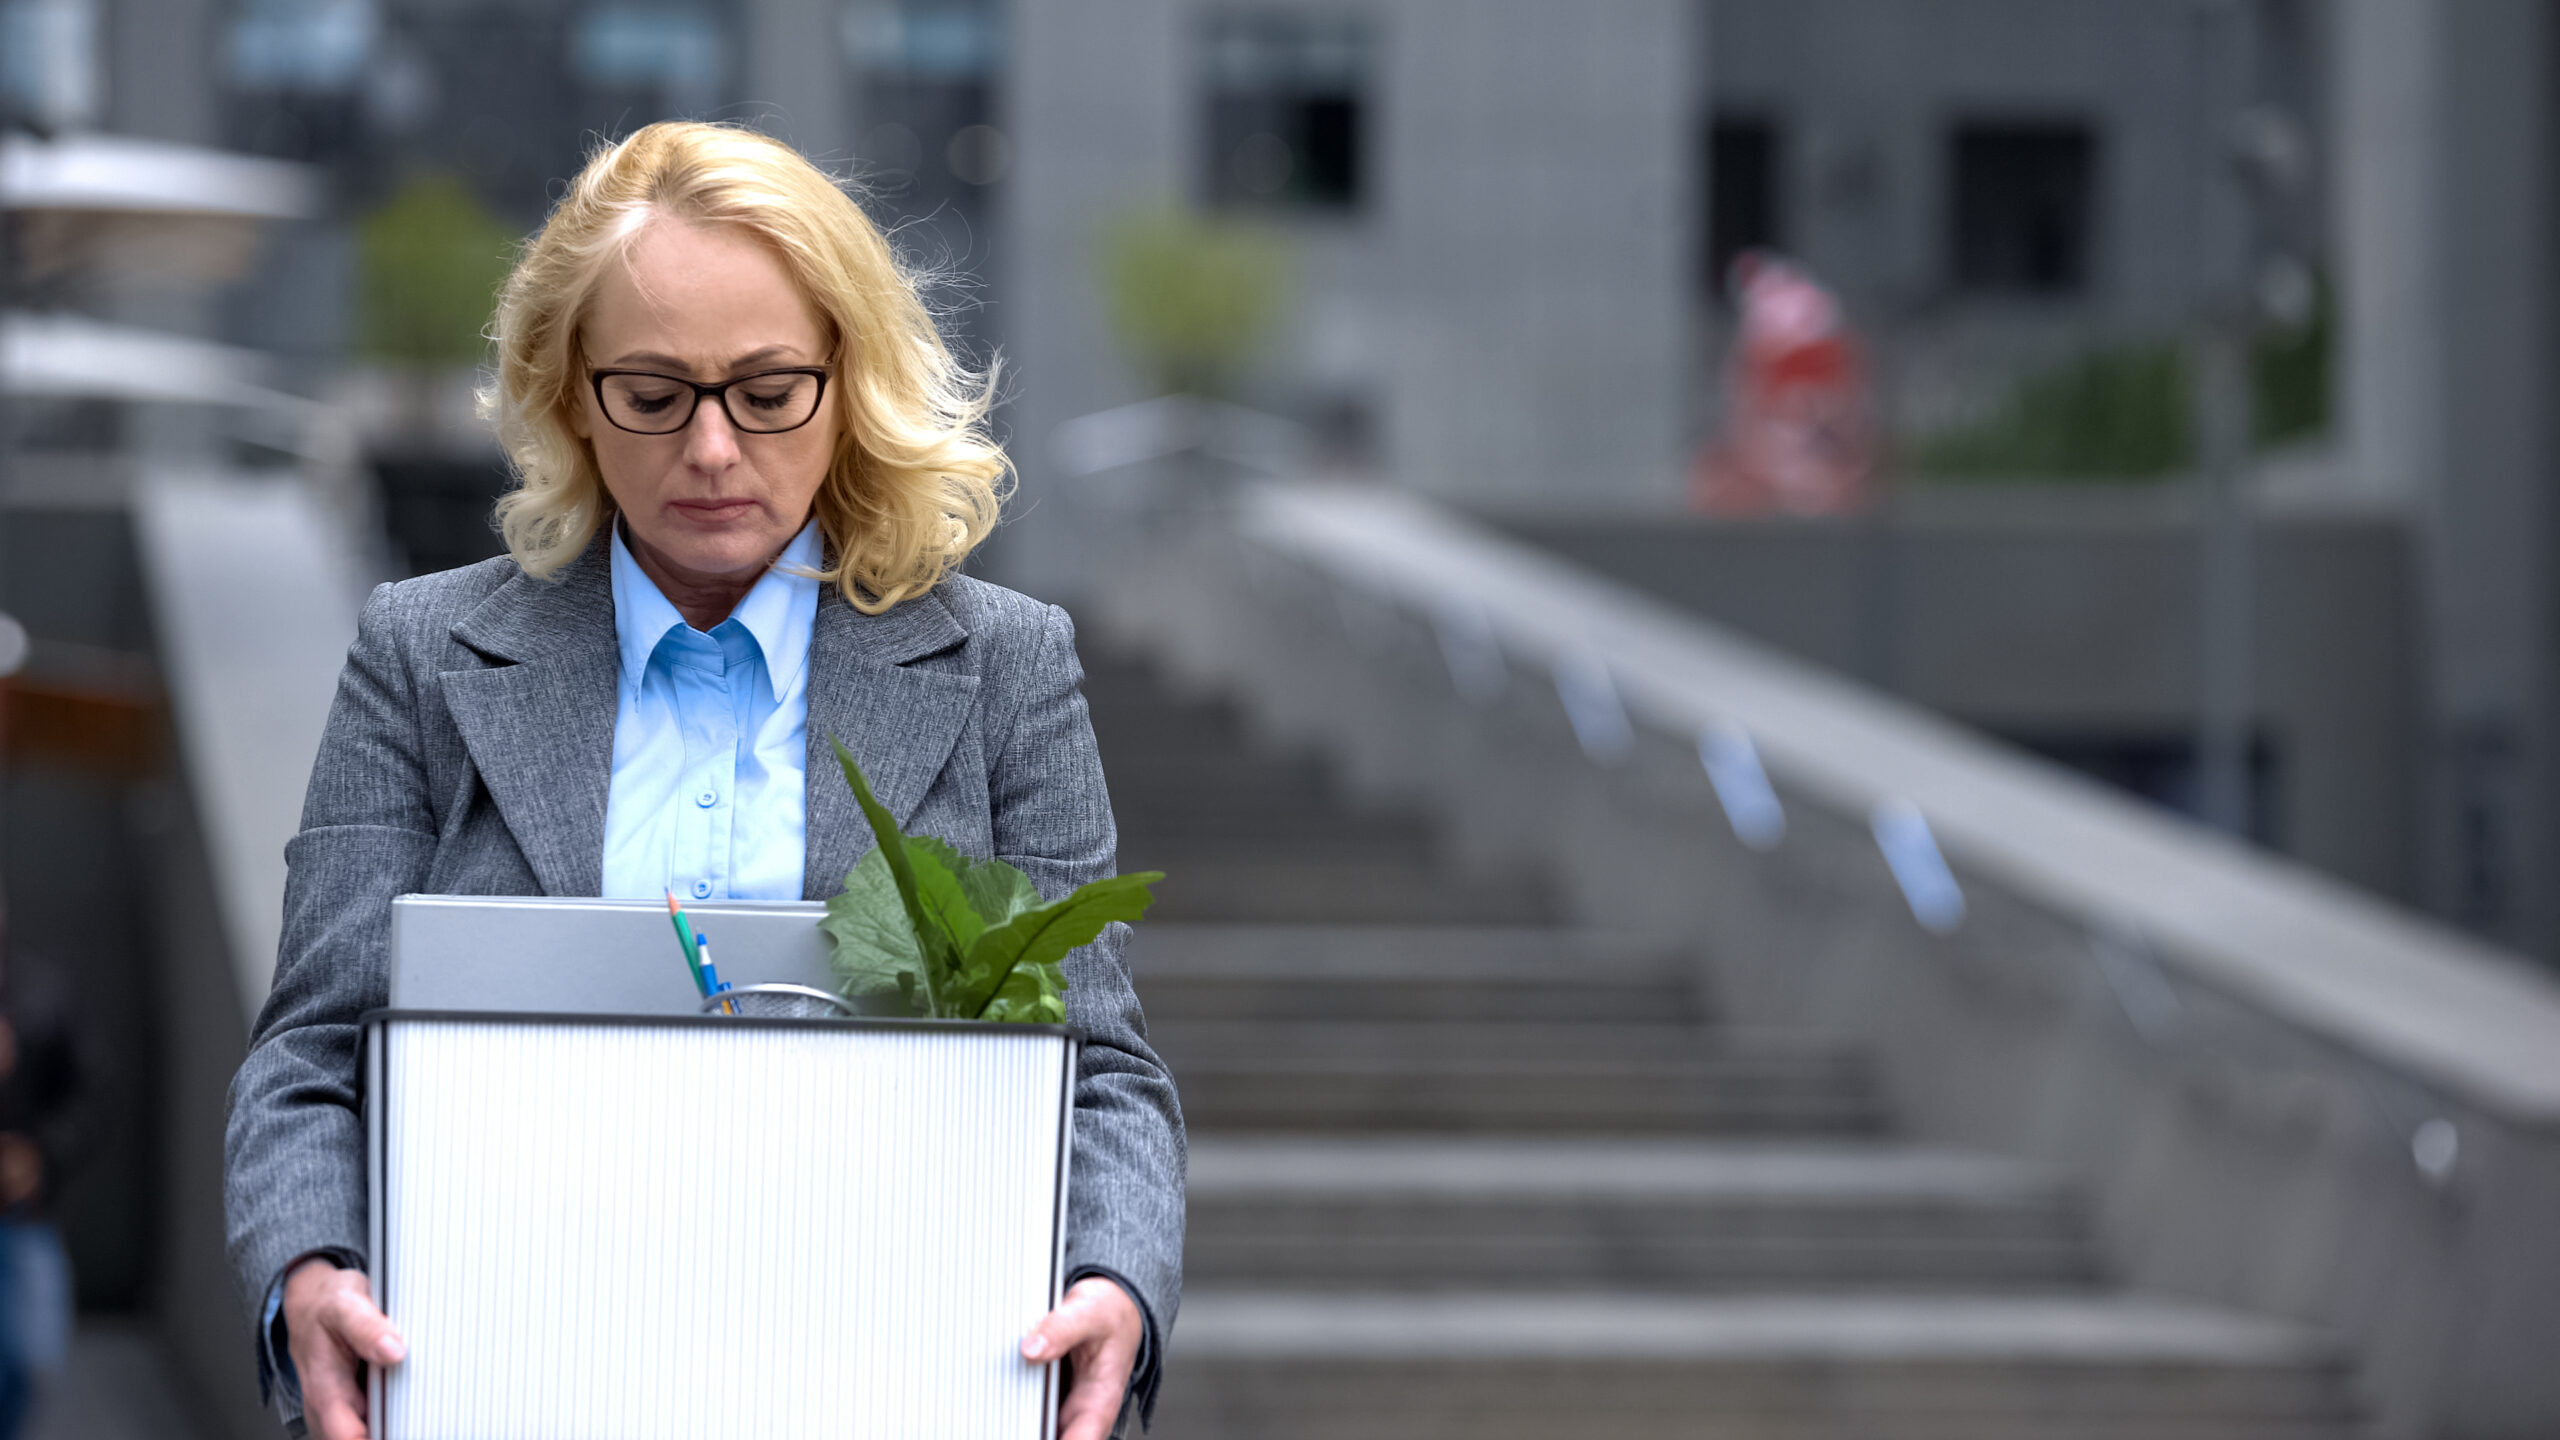 depressed woman worker who just resigned carrying a box of office materials